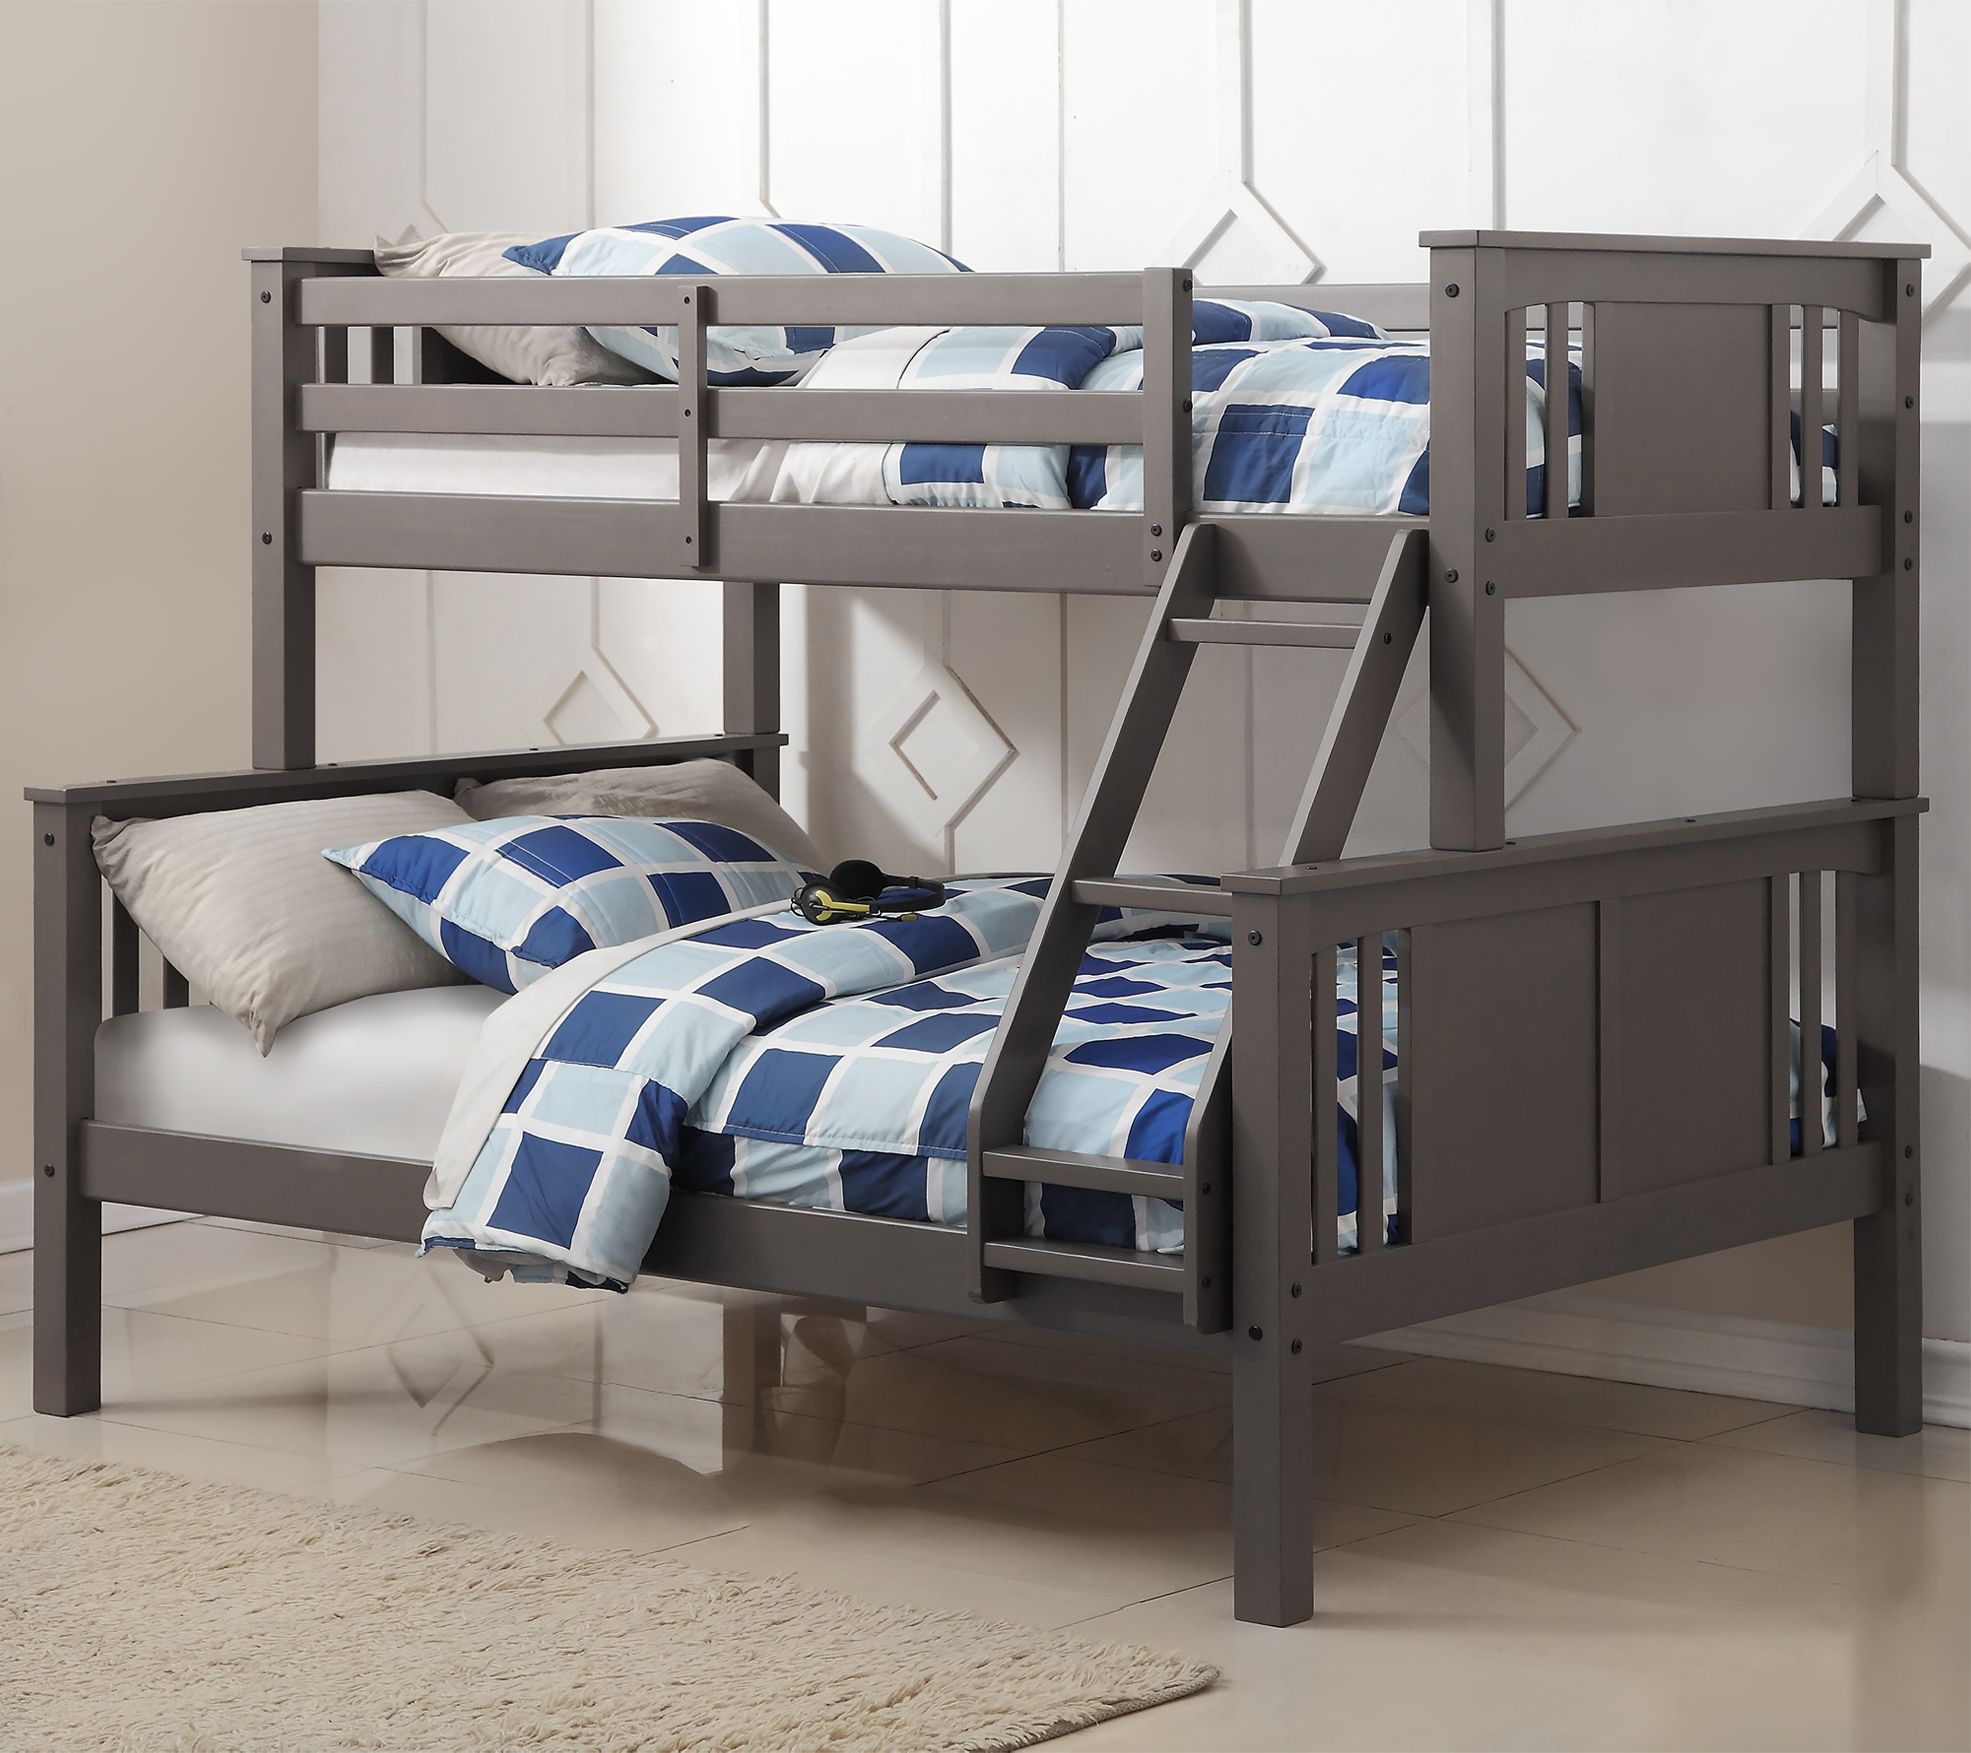 Full Princeton Mission Bunk Bed Qvc Com, Valerie Full Over Full Bunk Bed